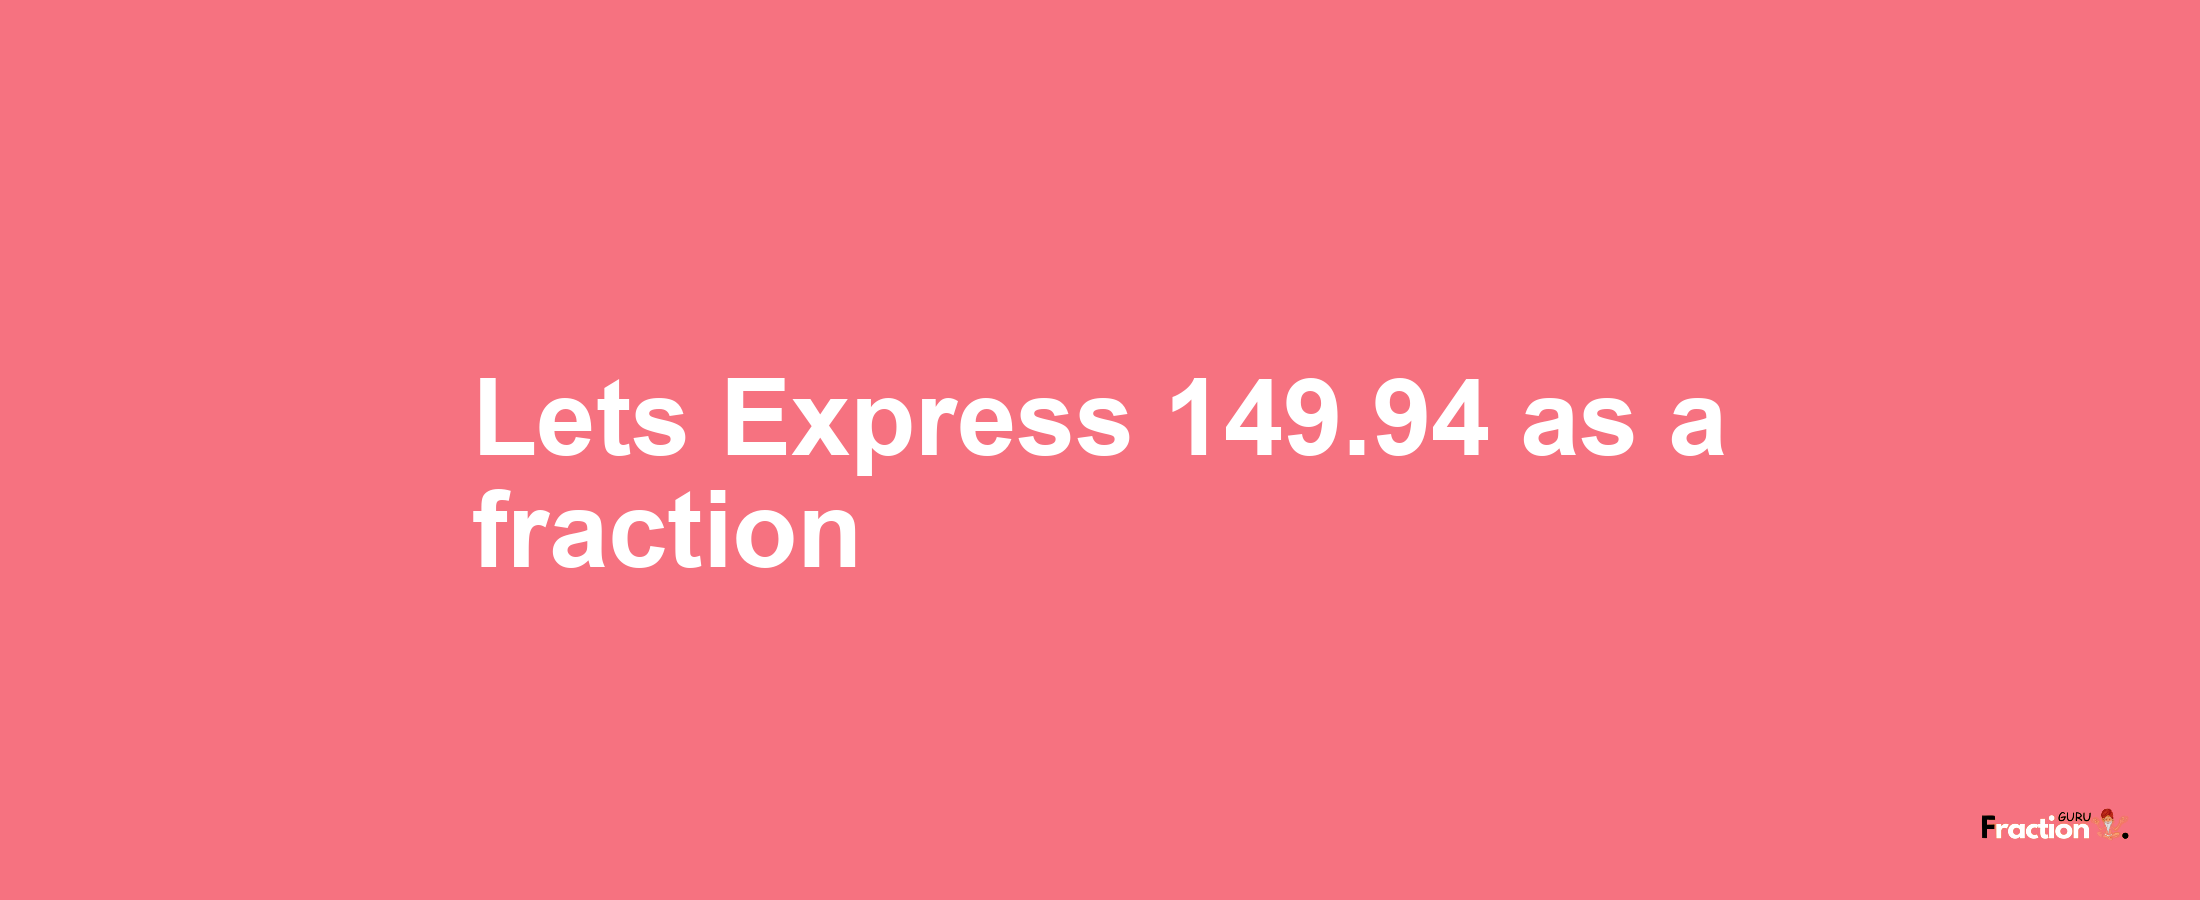 Lets Express 149.94 as afraction